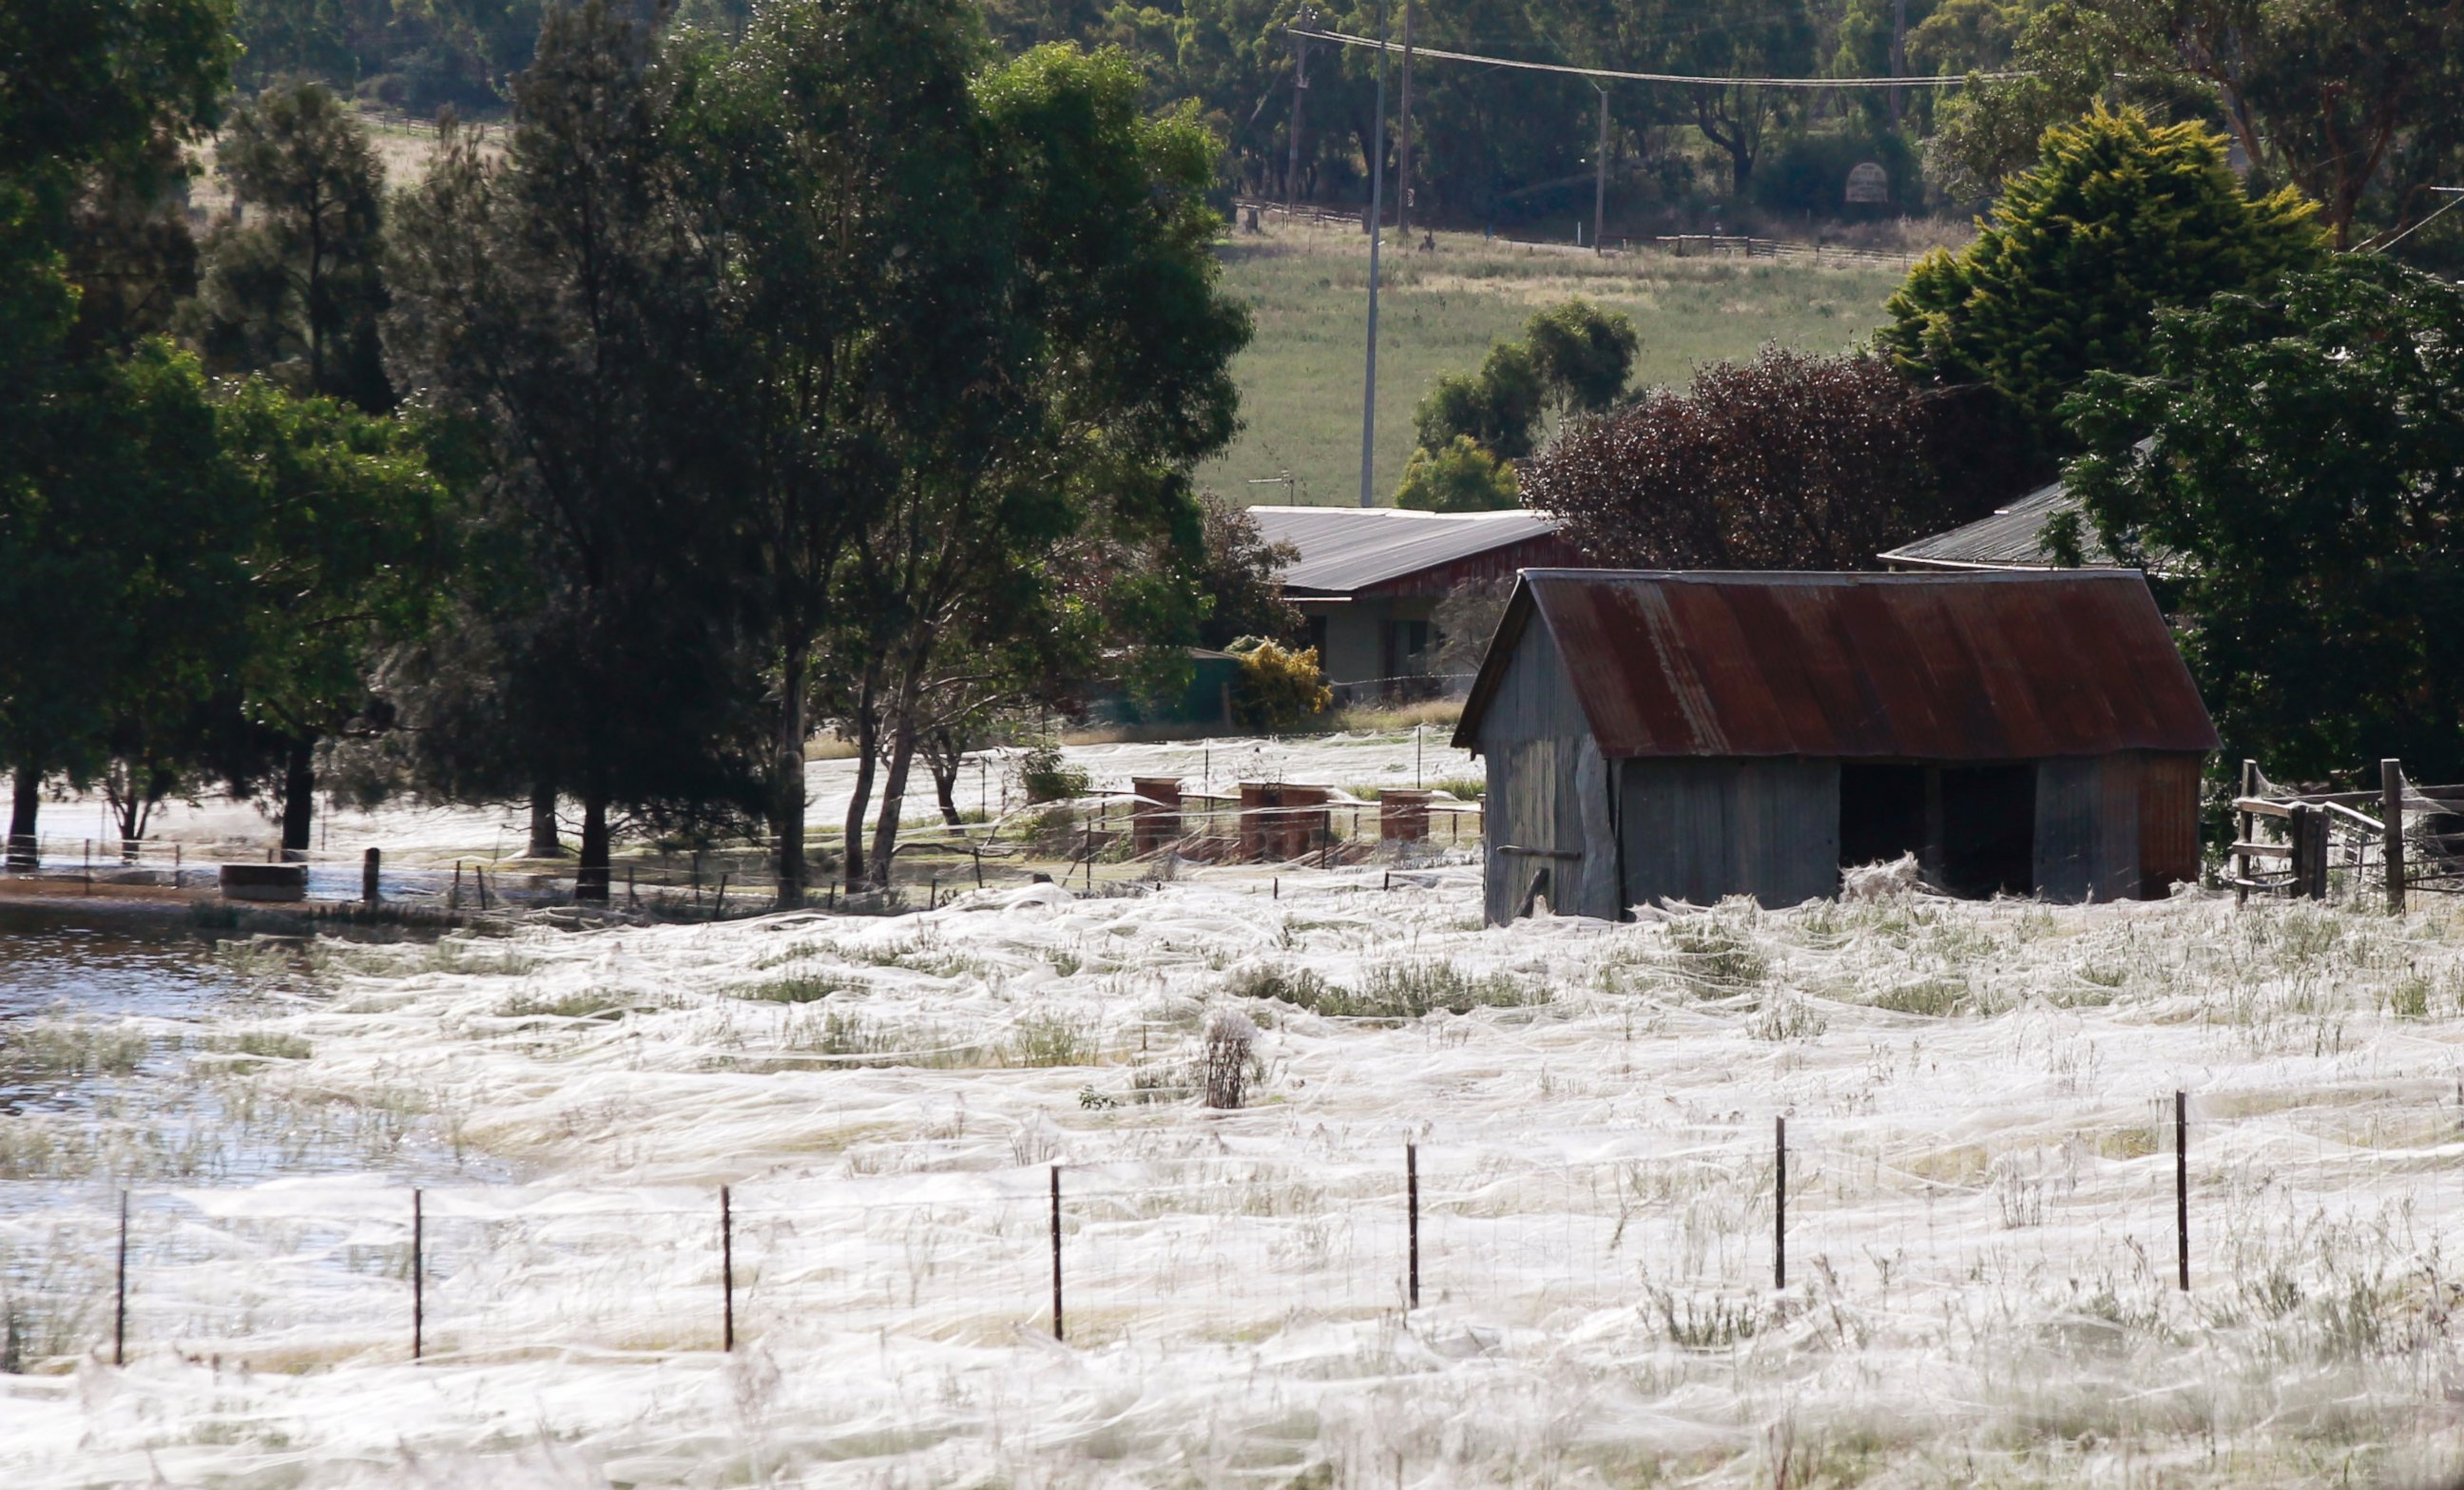 PHOTO: A house is surrounded by spiderwebs next to flood waters in Wagga Wagga, Australia on March 6, 2012.